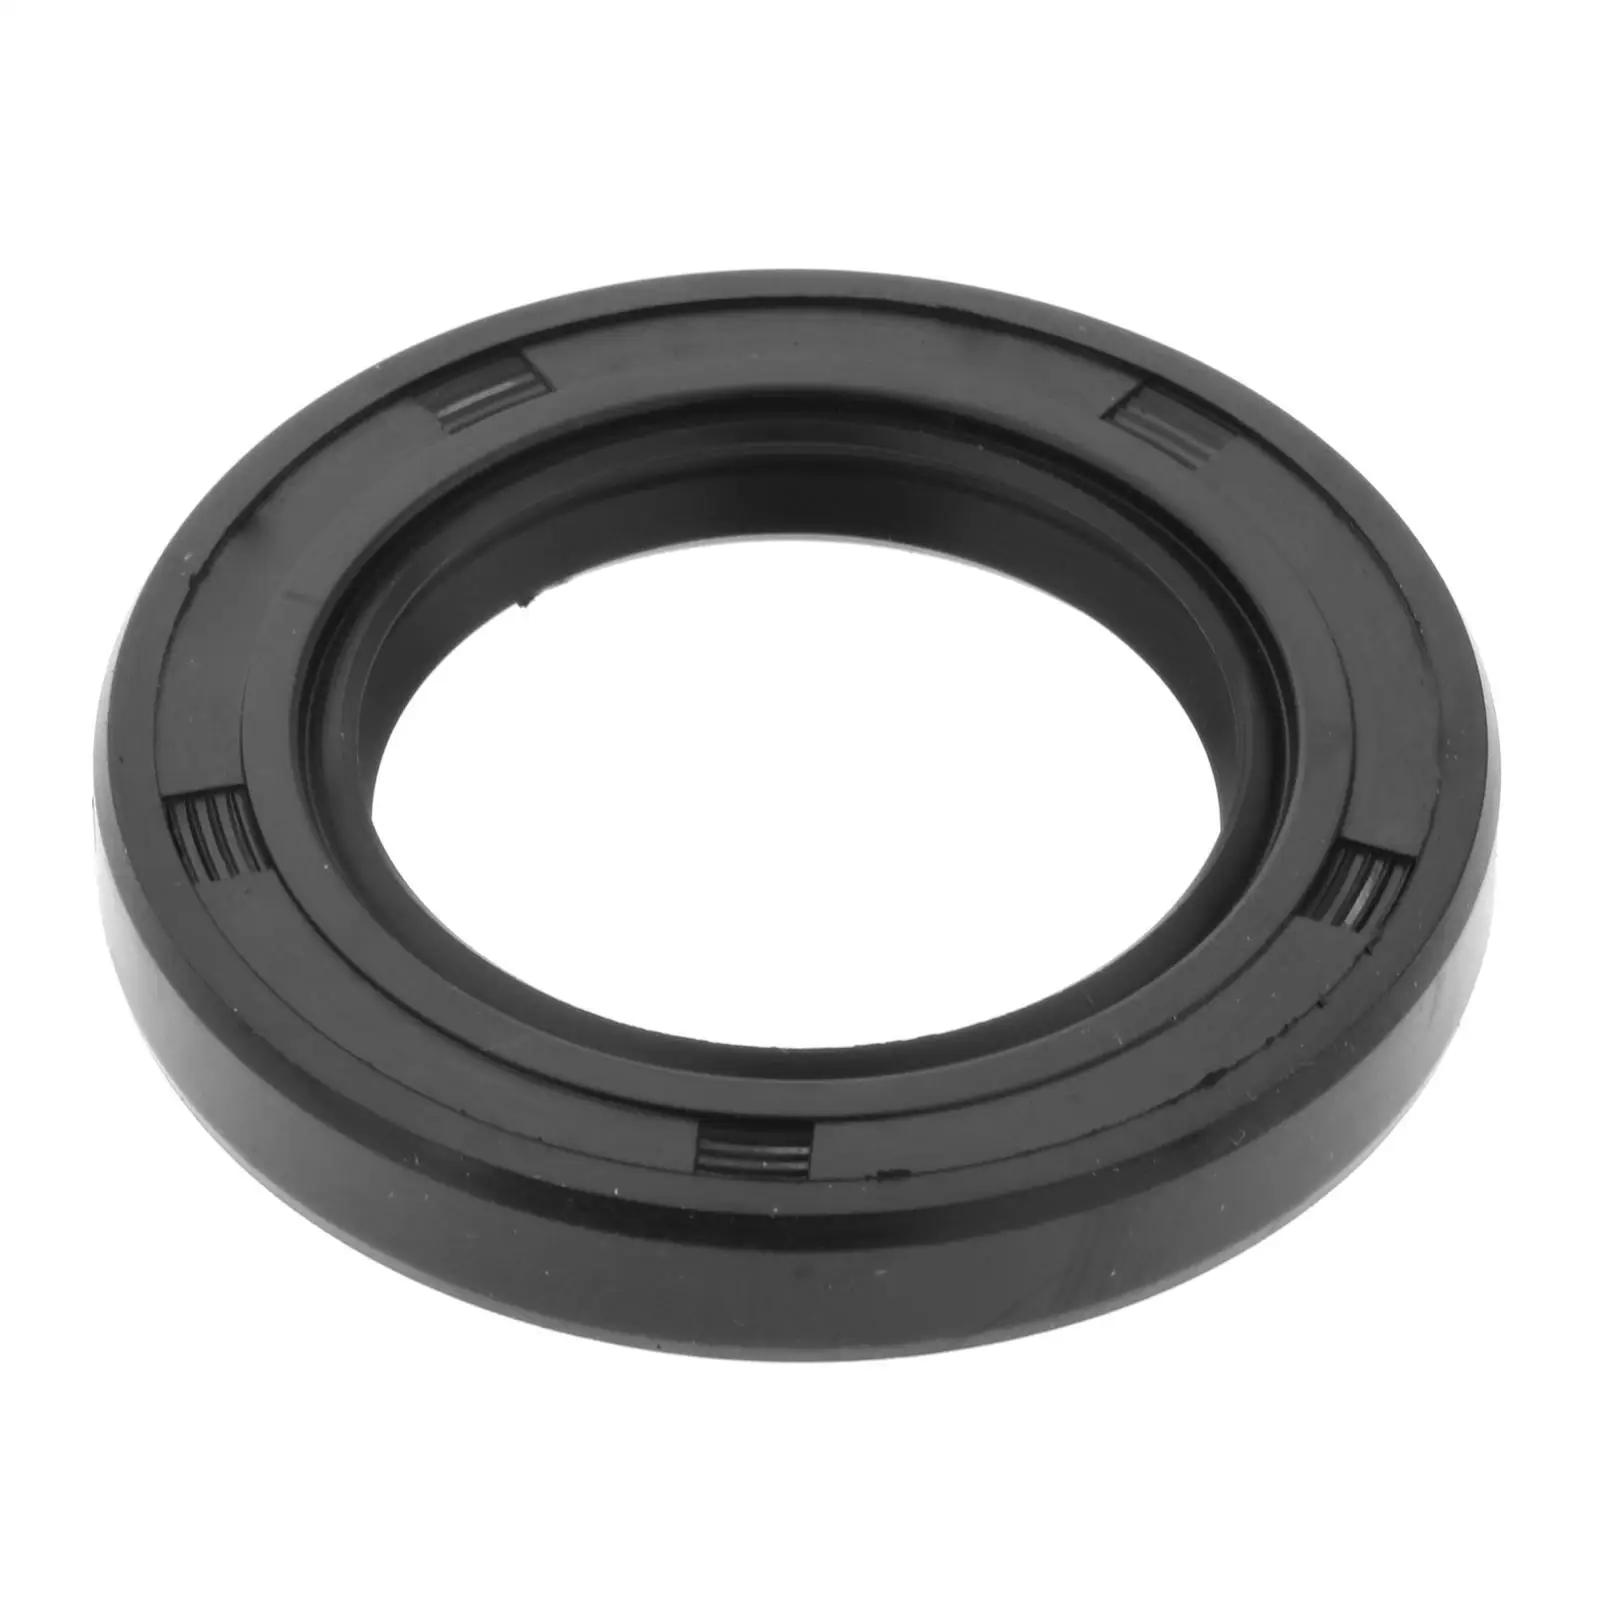 Oil Seal 93102-30M23 Fit for  Outboard Motor Accessory Replaces